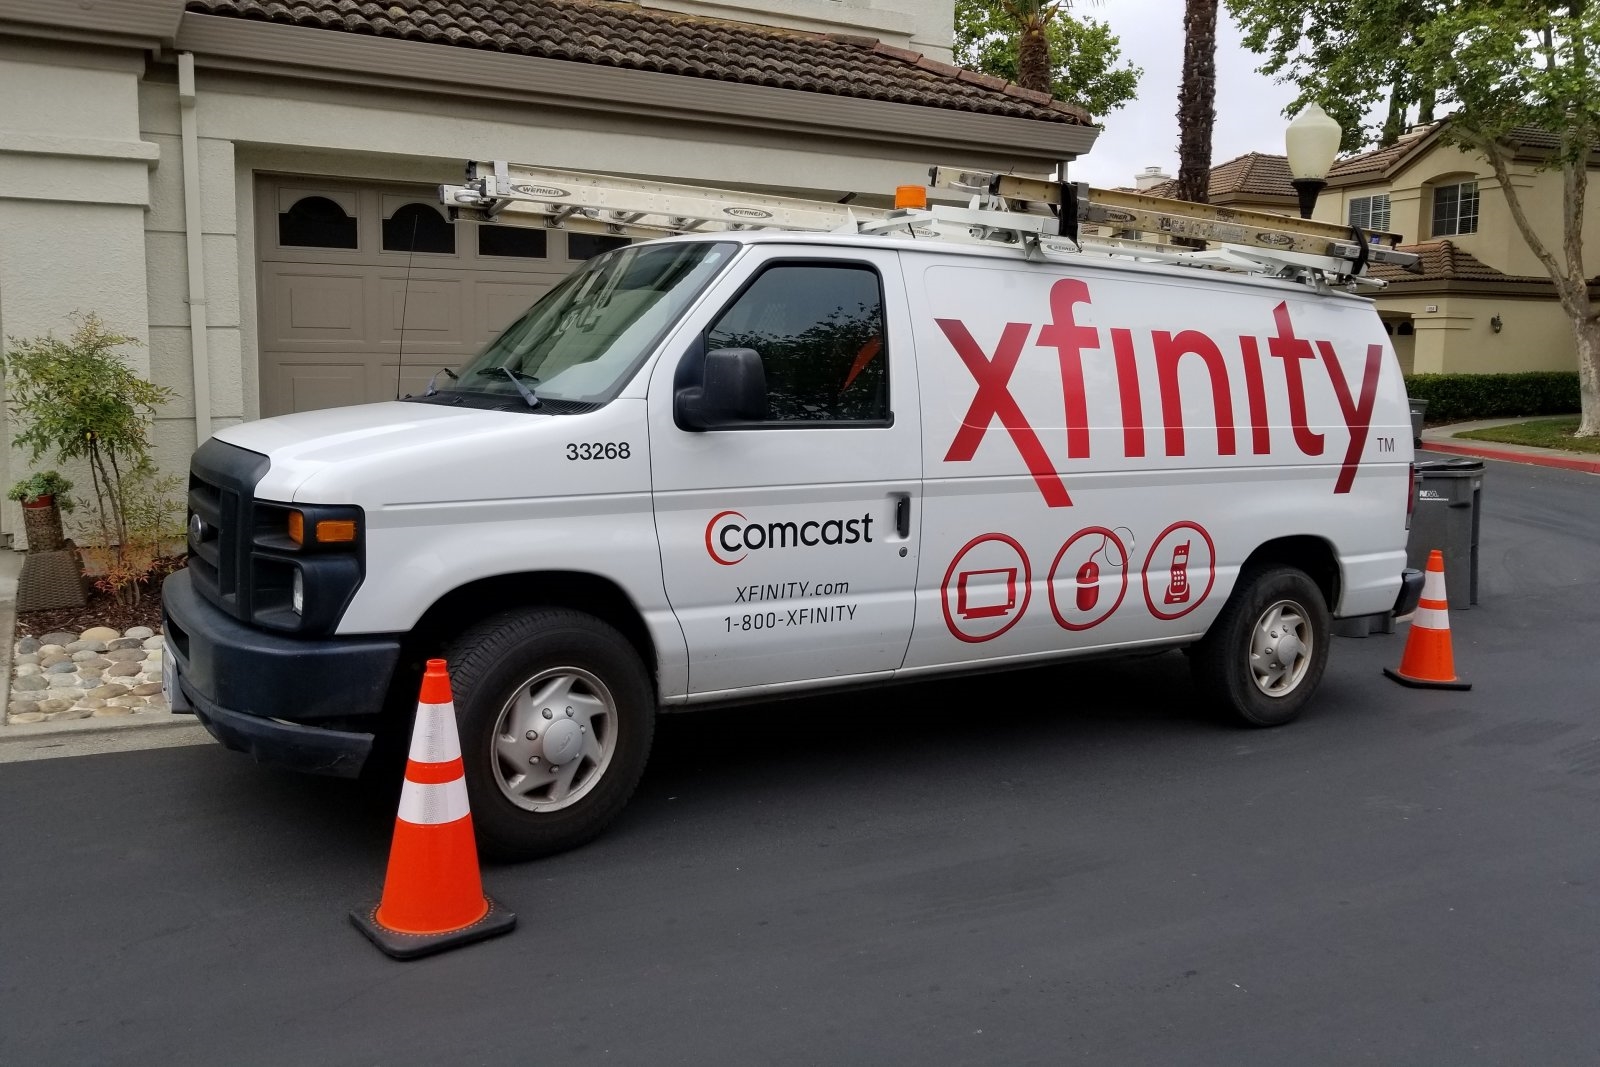 Comcast to pay $9.1 million for adding service plans without consent | DeviceDaily.com